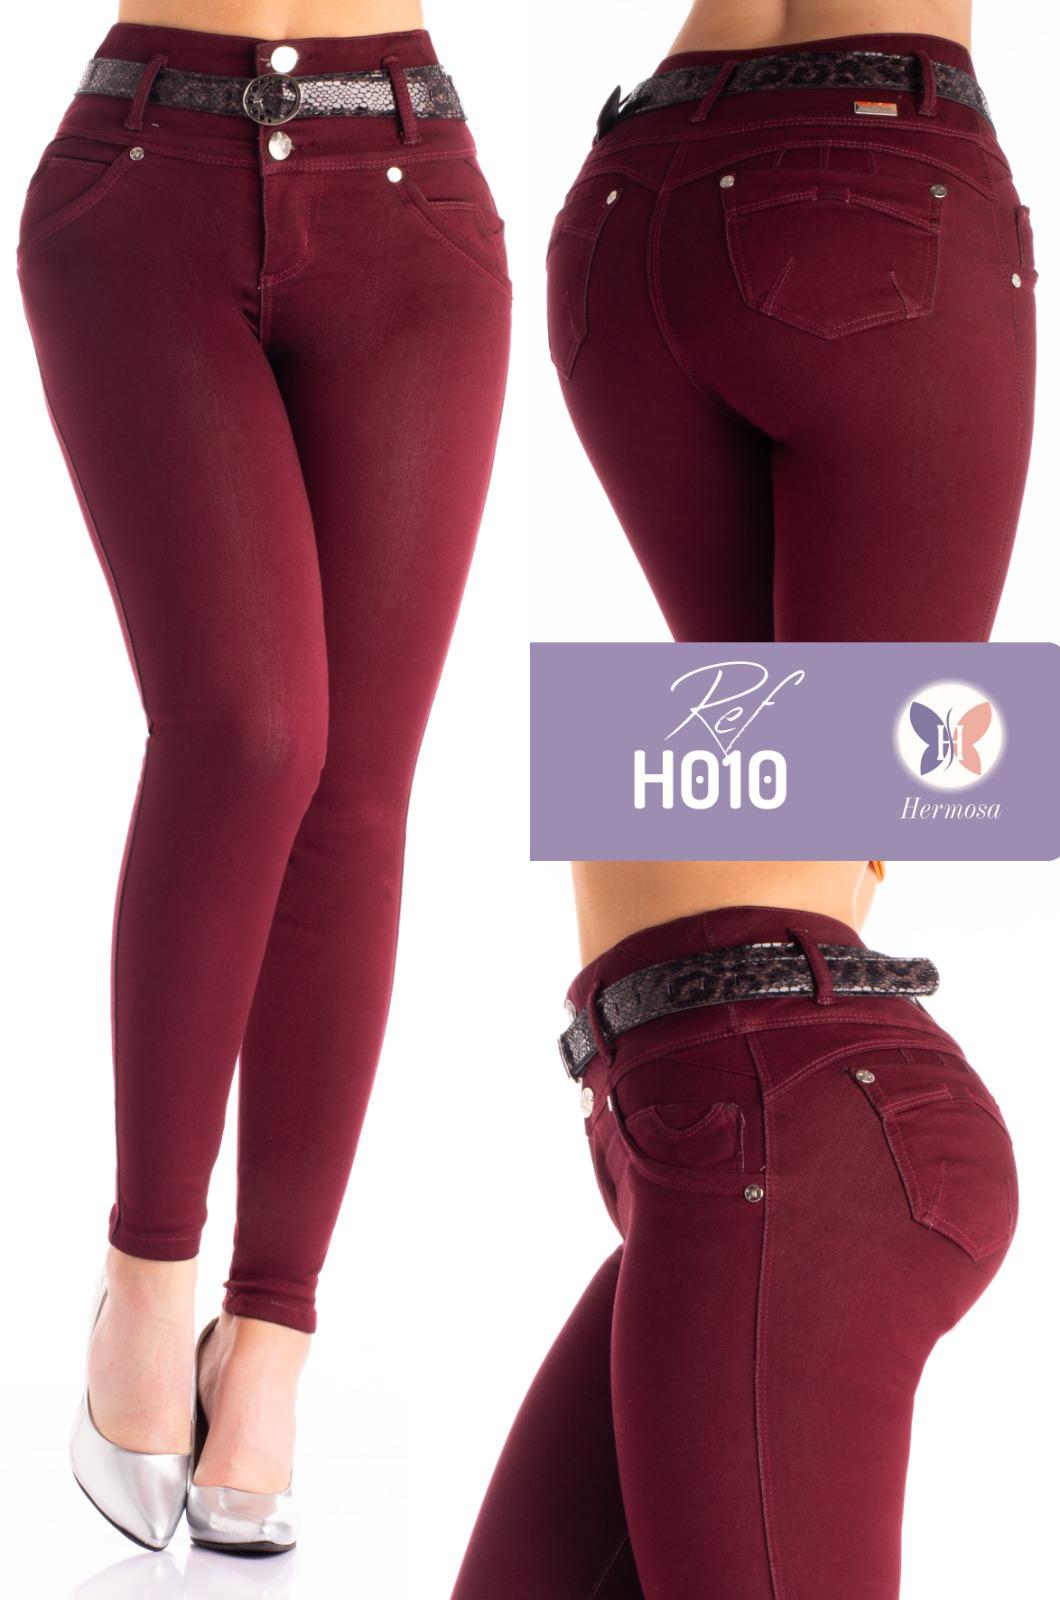 Red Push Up Jeans - H010